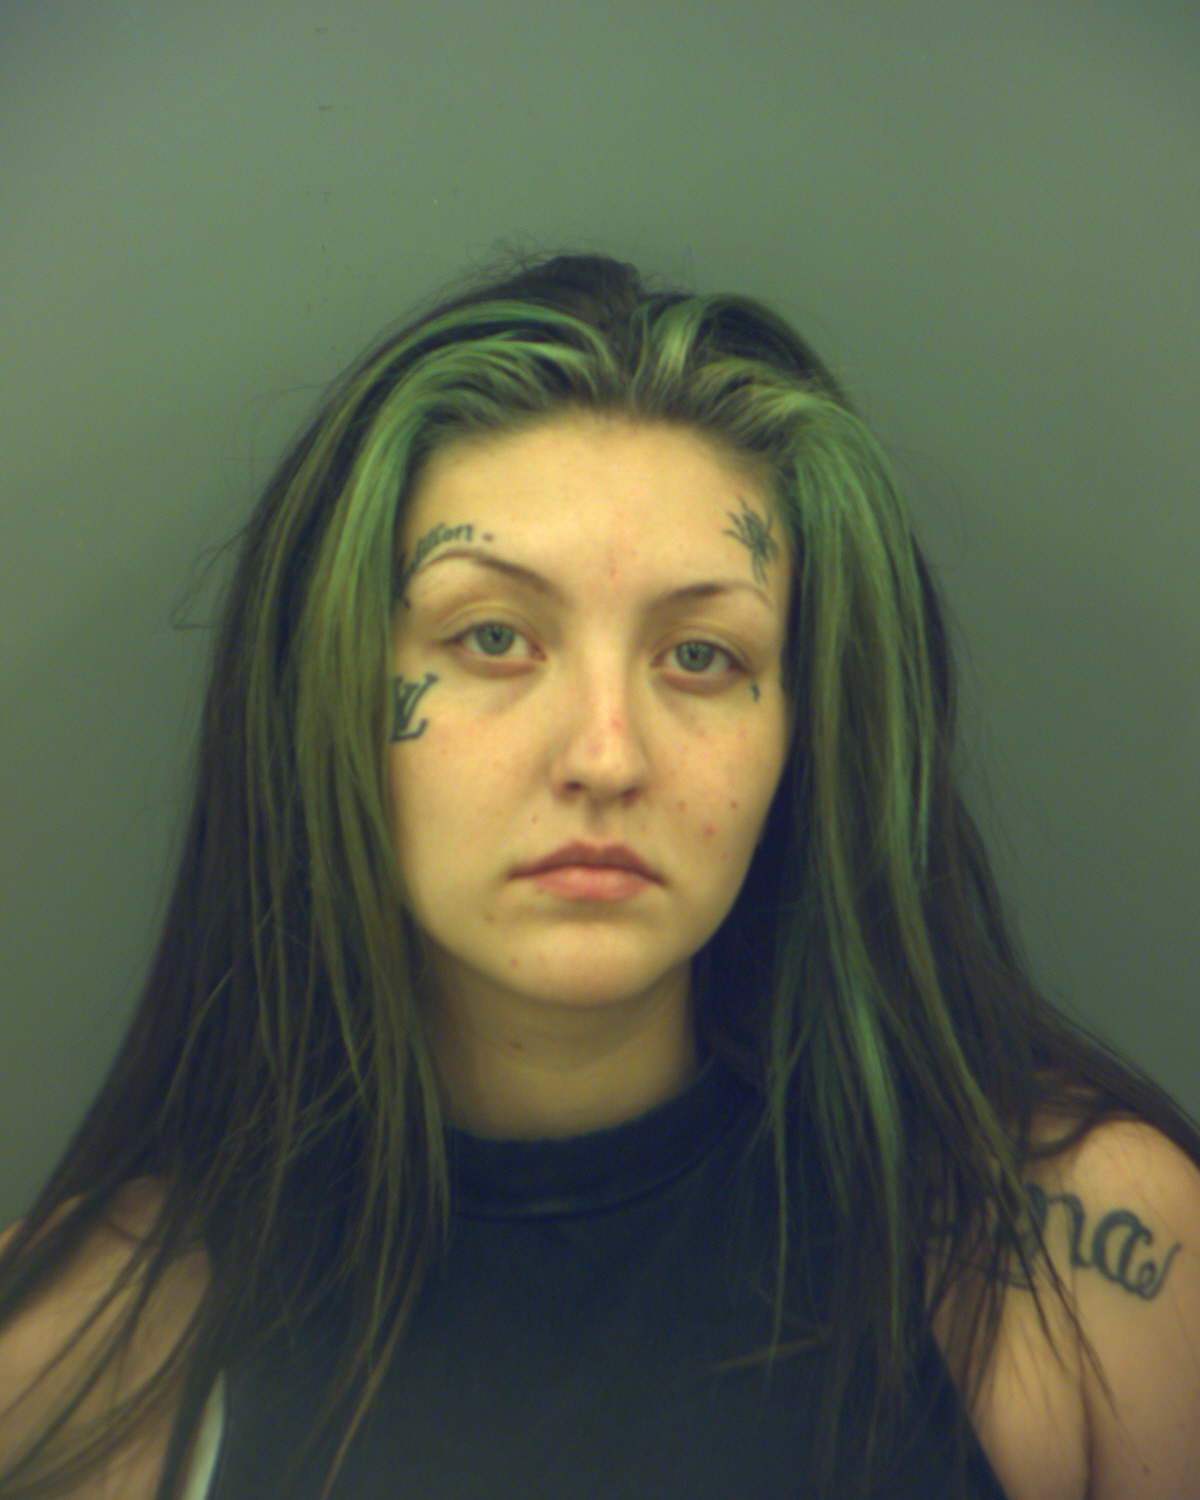 Police Routine traffic stop leads to arrest of woman with pot, m